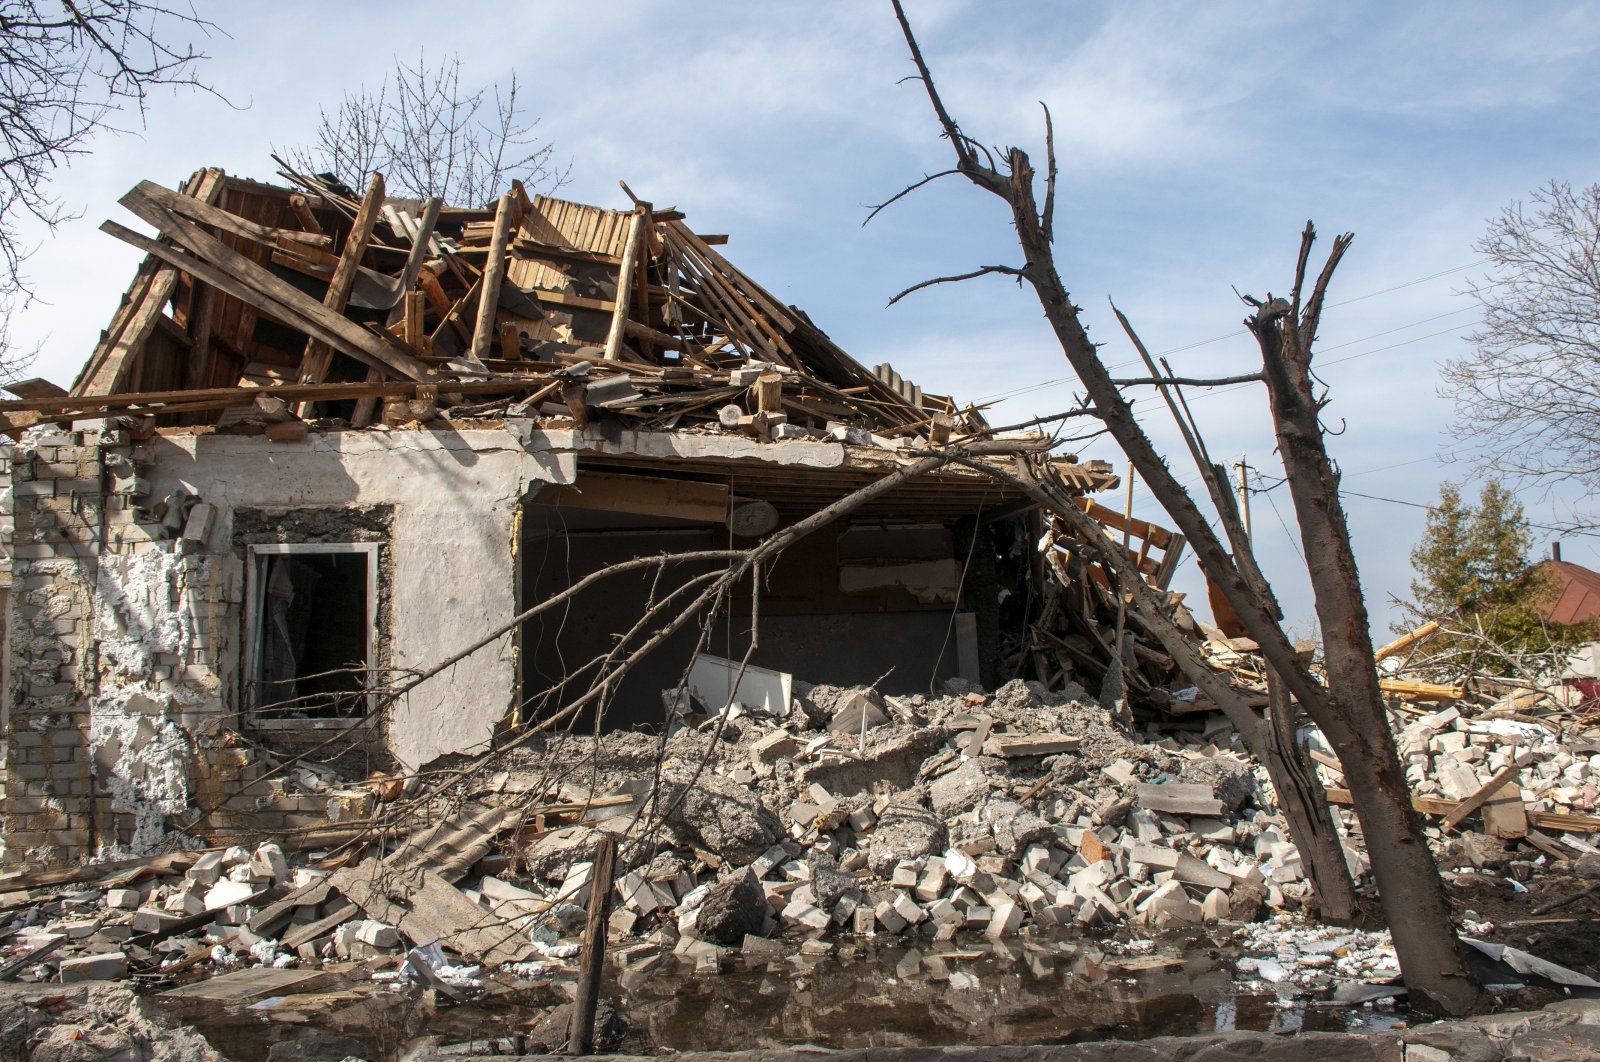 A handout photo made available by the Ukrainian Presidential Press Service shows a destroyed private building after shelling in Chuguev city in the Kharkiv area, Ukraine, April 8, 2022. (EPA Photo)